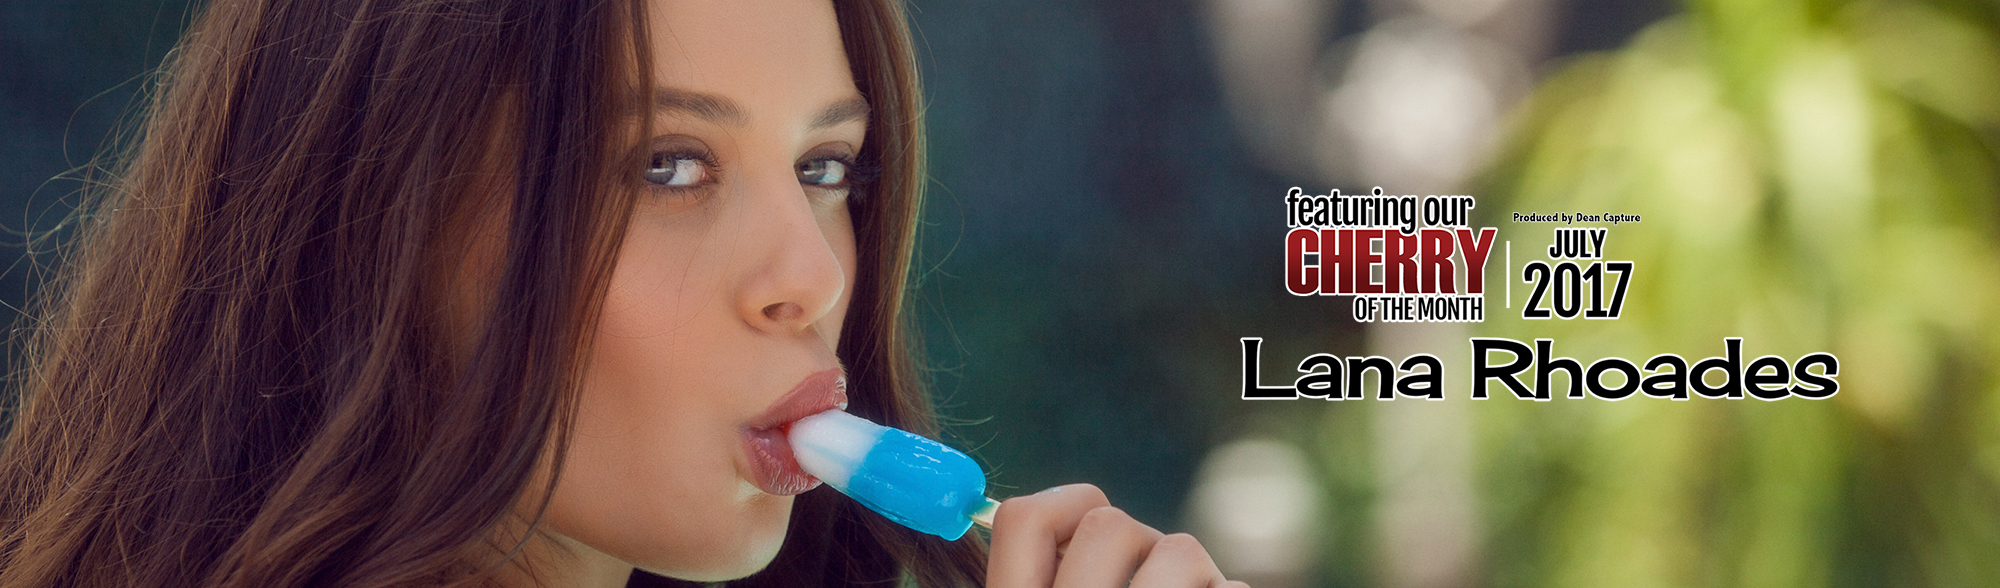 Cherry Of The Month: July 2017 &#8211; Lana Rhoades